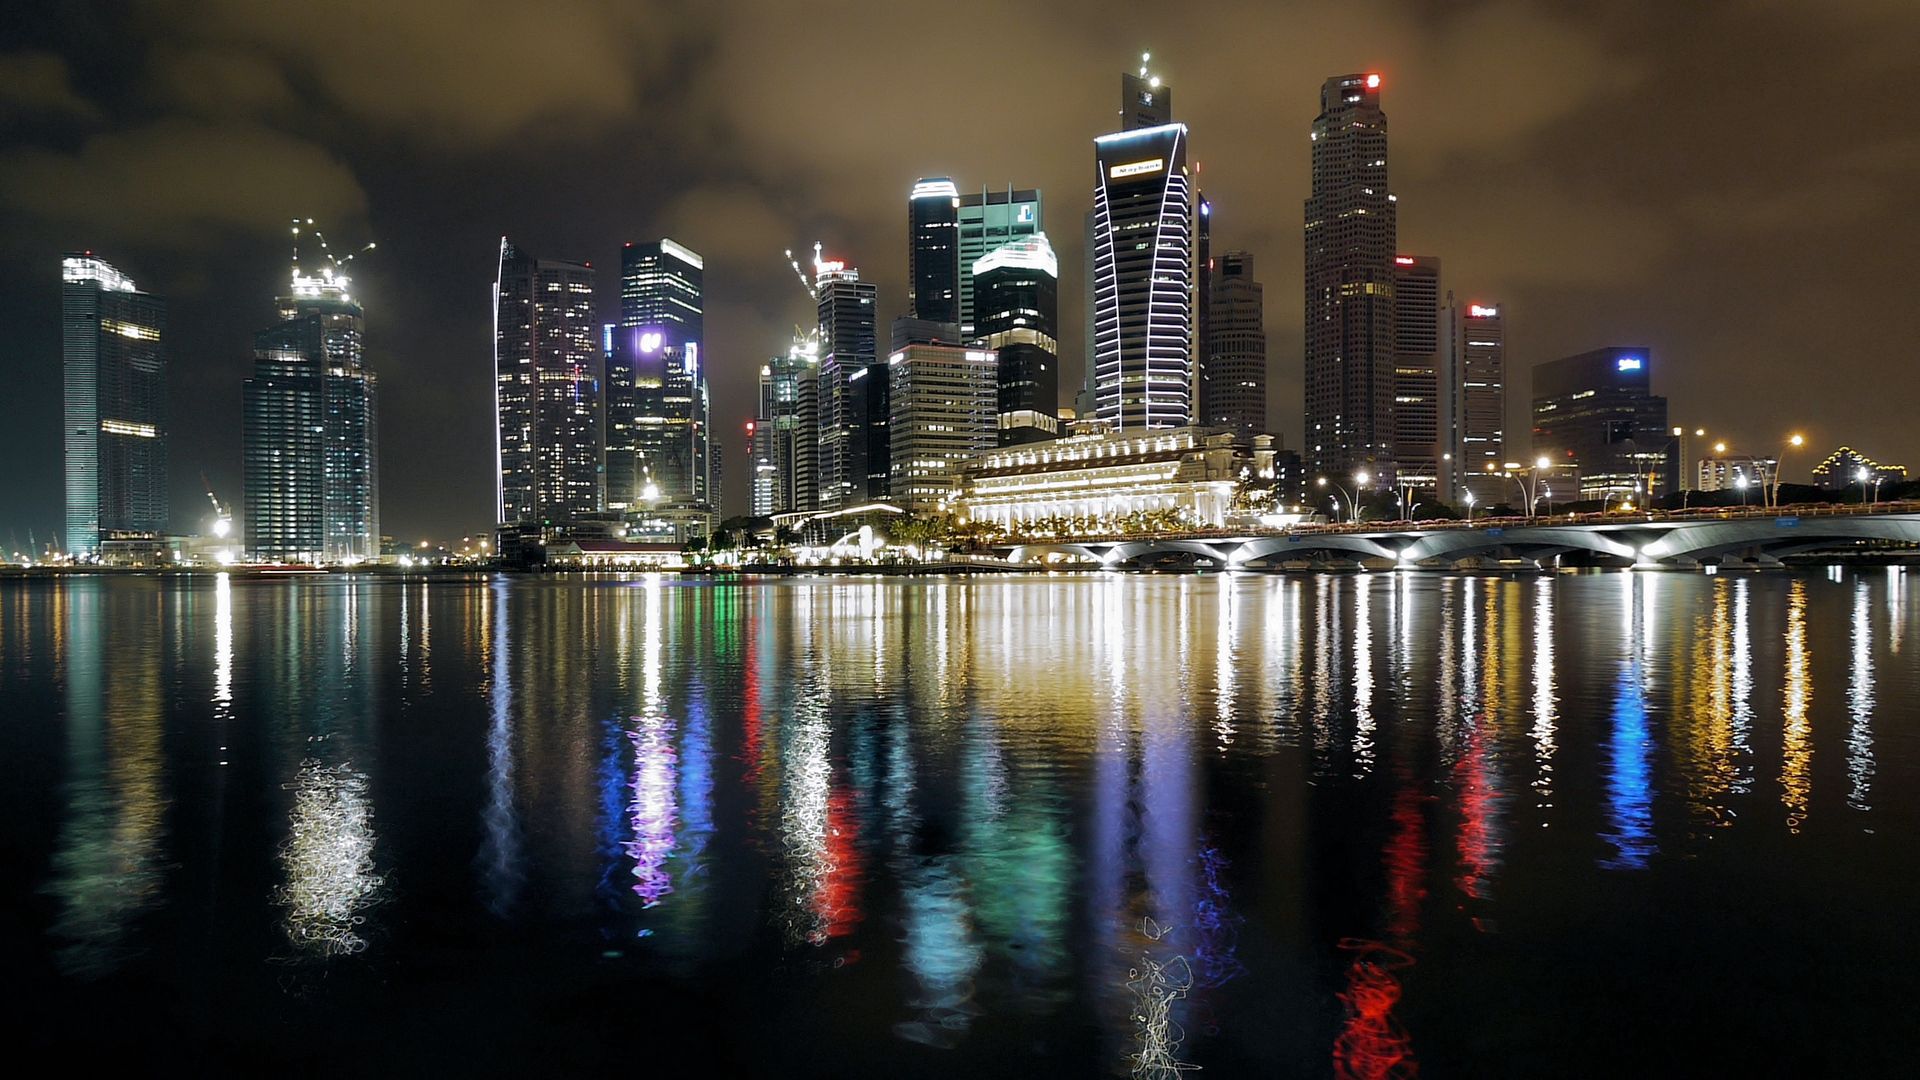 reflection, singapore, cities, colourful, colorful, building, night